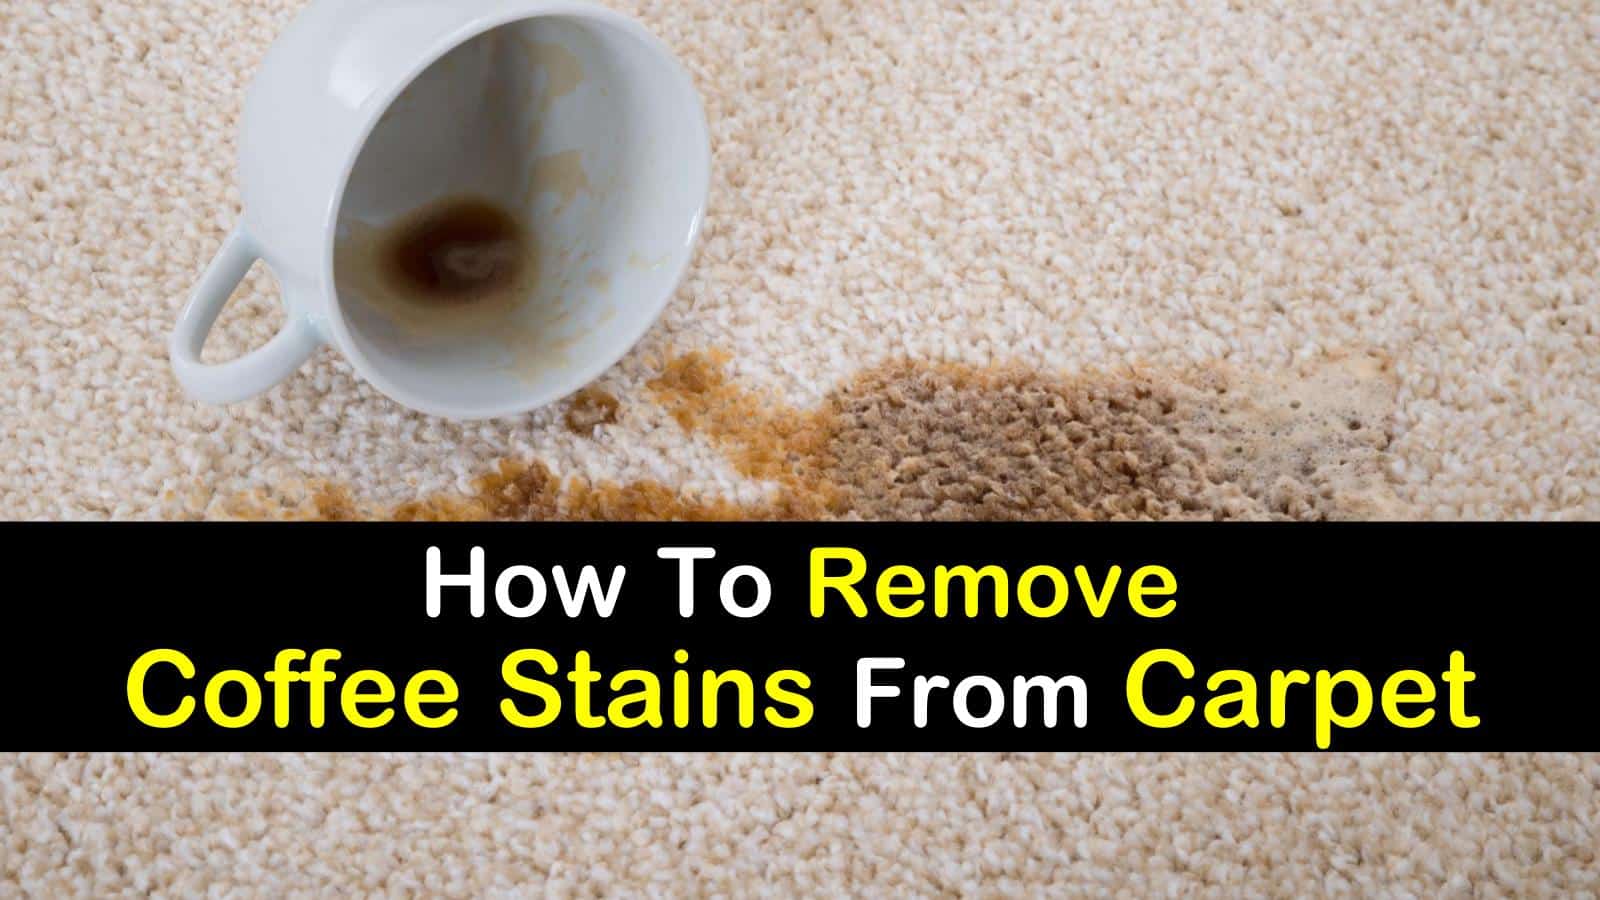 6 Incredibly Easy Ways To Remove Coffee Stains From Carpet